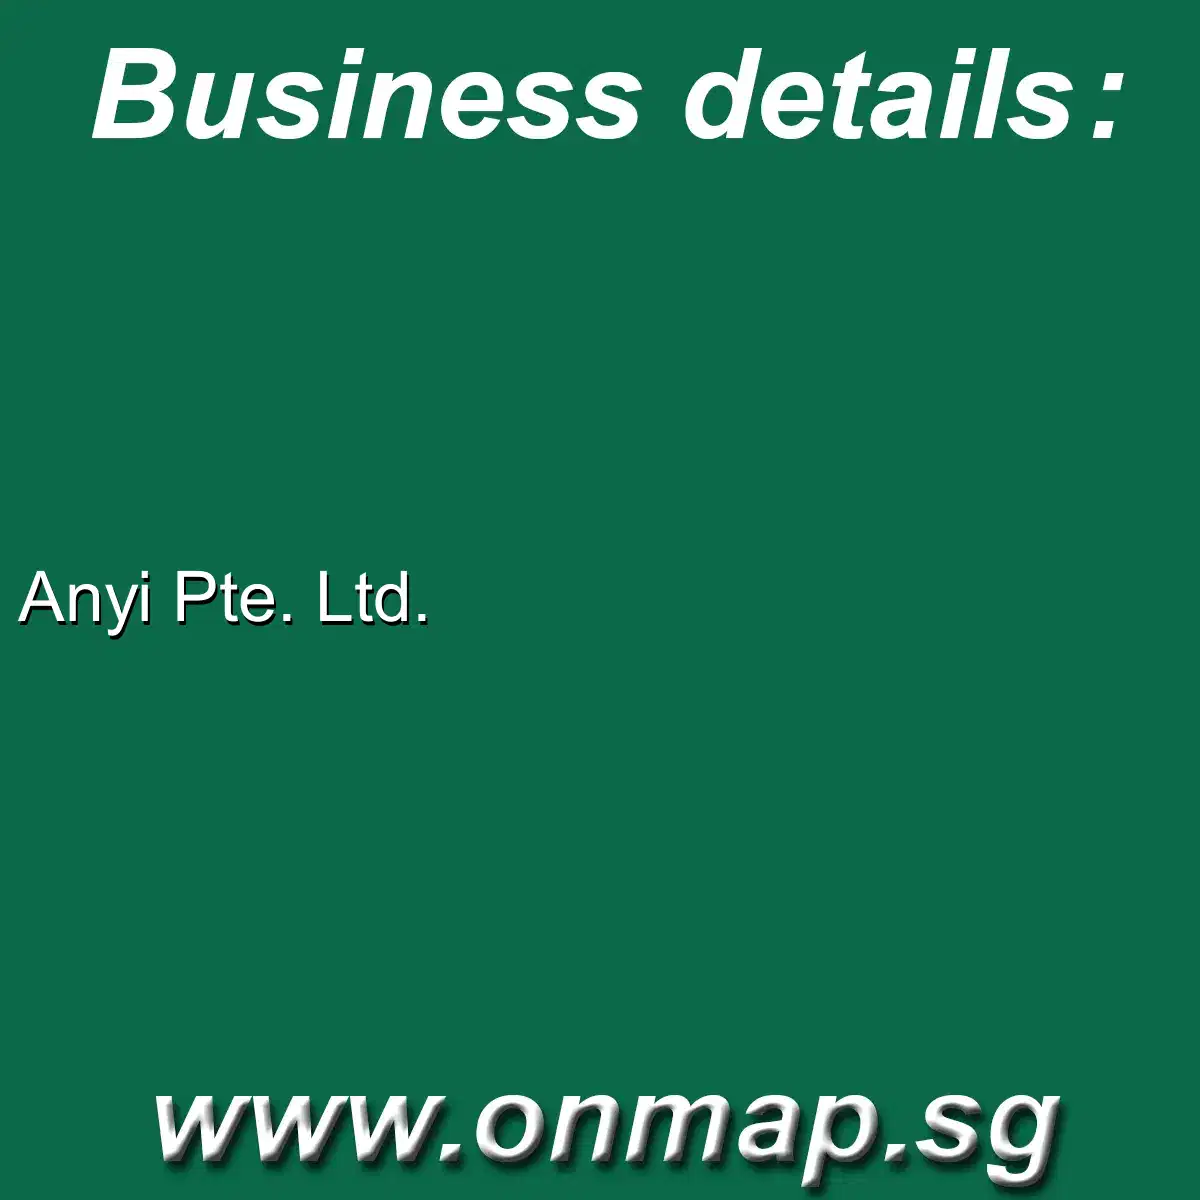 Anyi Pte. Ltd. - Details, Locations, Reviews